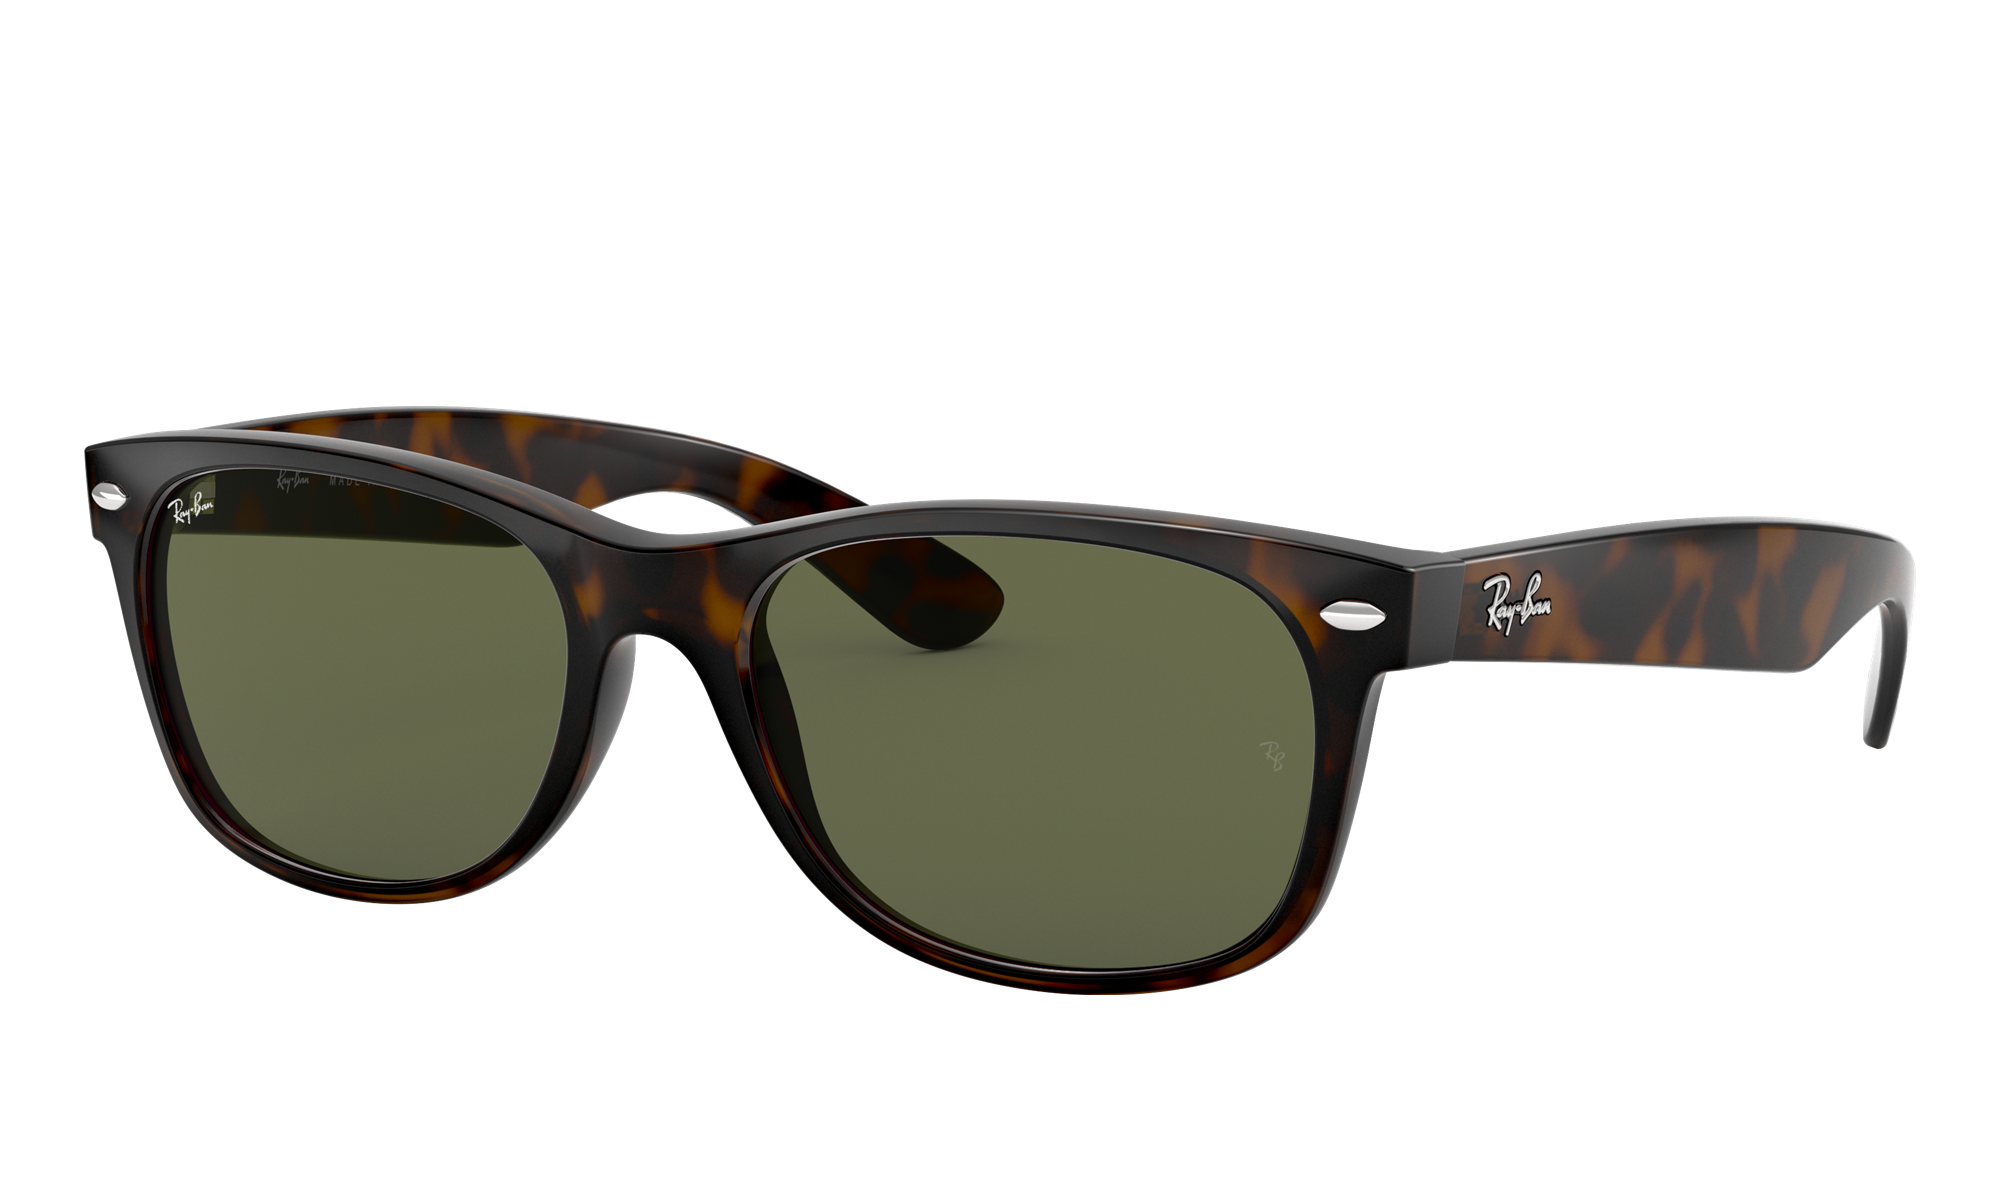 Ray-Ban Unisex Rb2132 Tortoise Size: Small -  RB2132 902 52-18